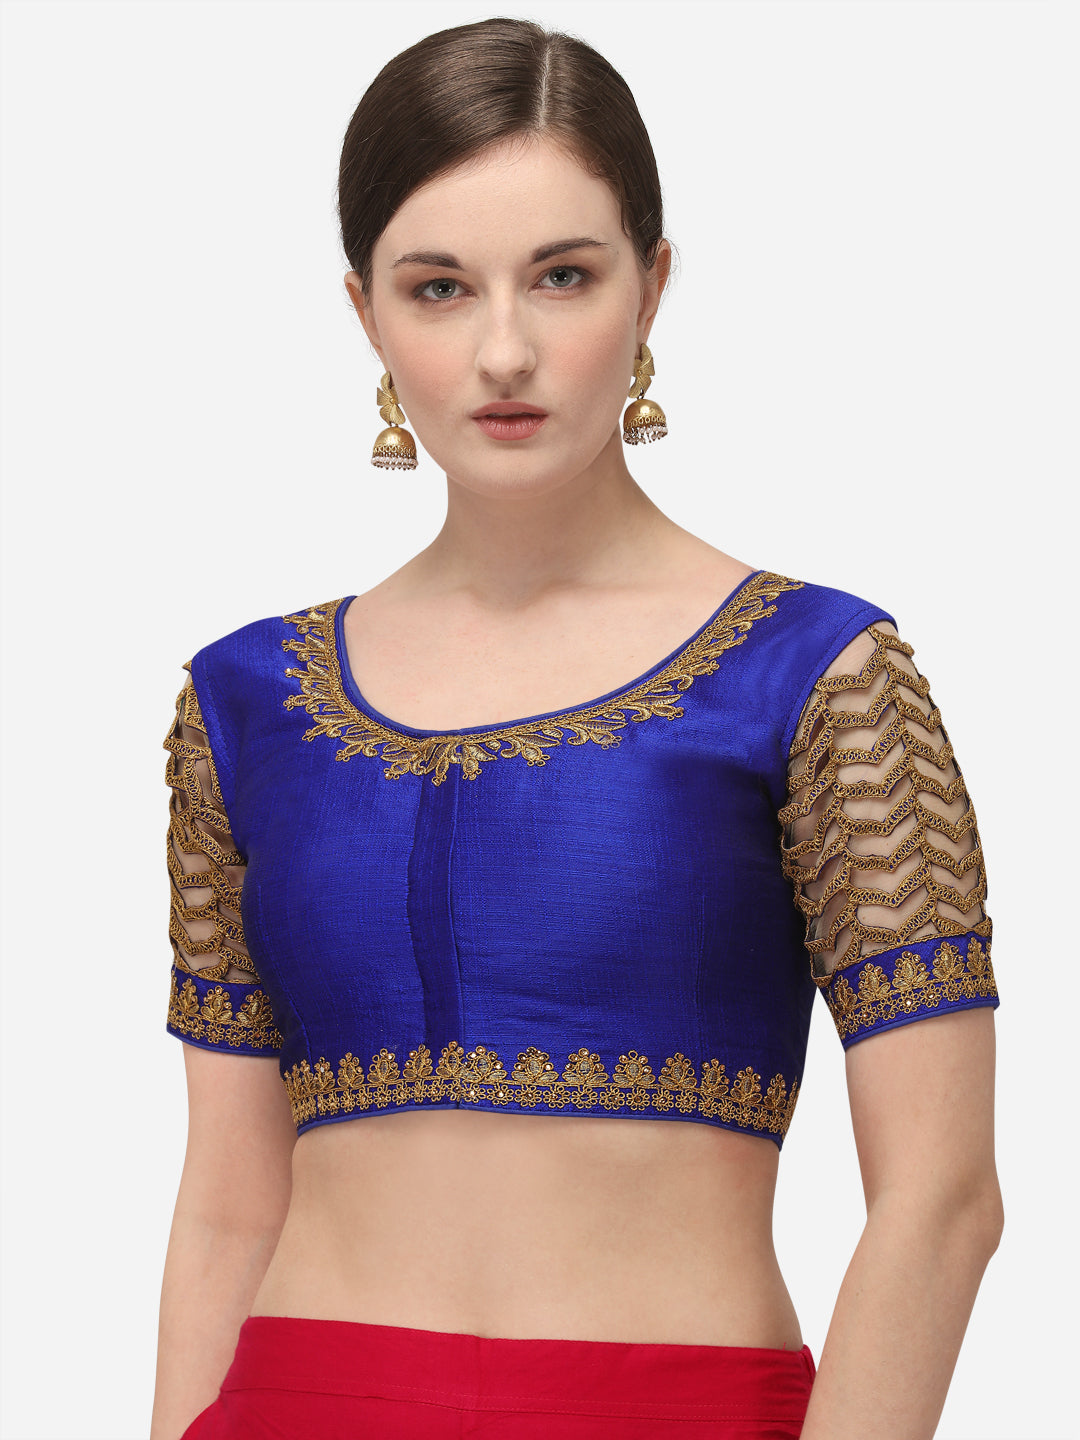 Elephent Design Blue Color Embroidery Work Blouse